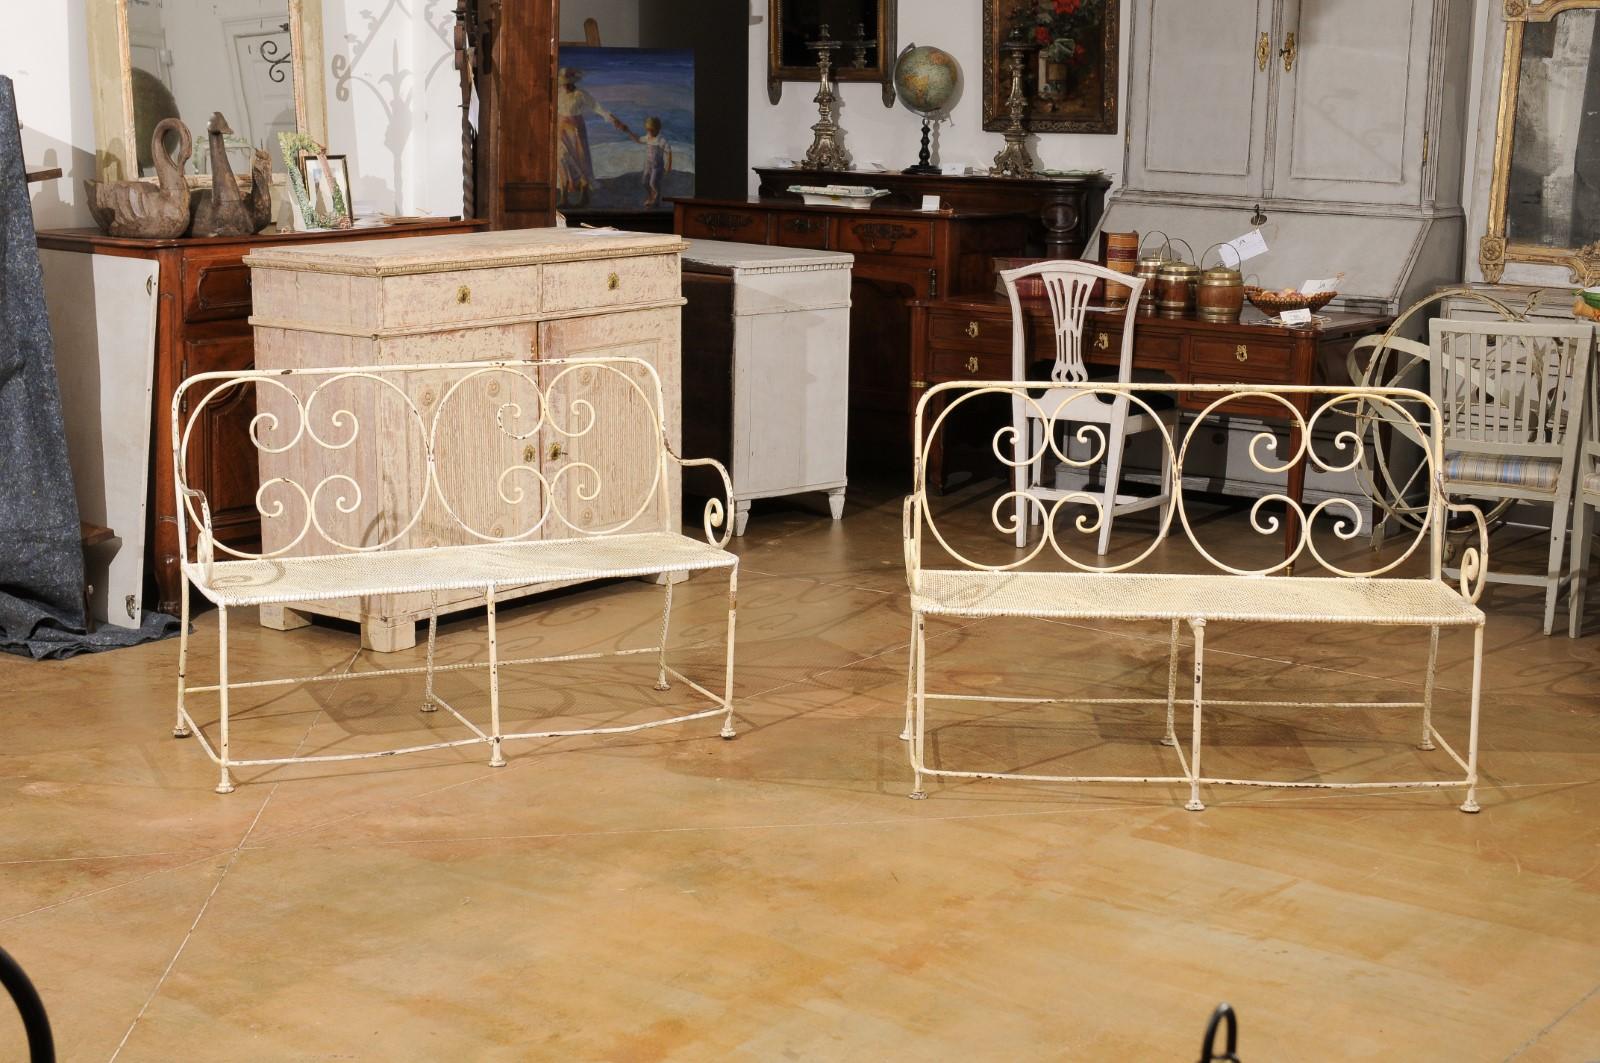 Napoleon III French 1850s Napoléon III Period Painted Iron Benches with C-Scrolls, Sold Each